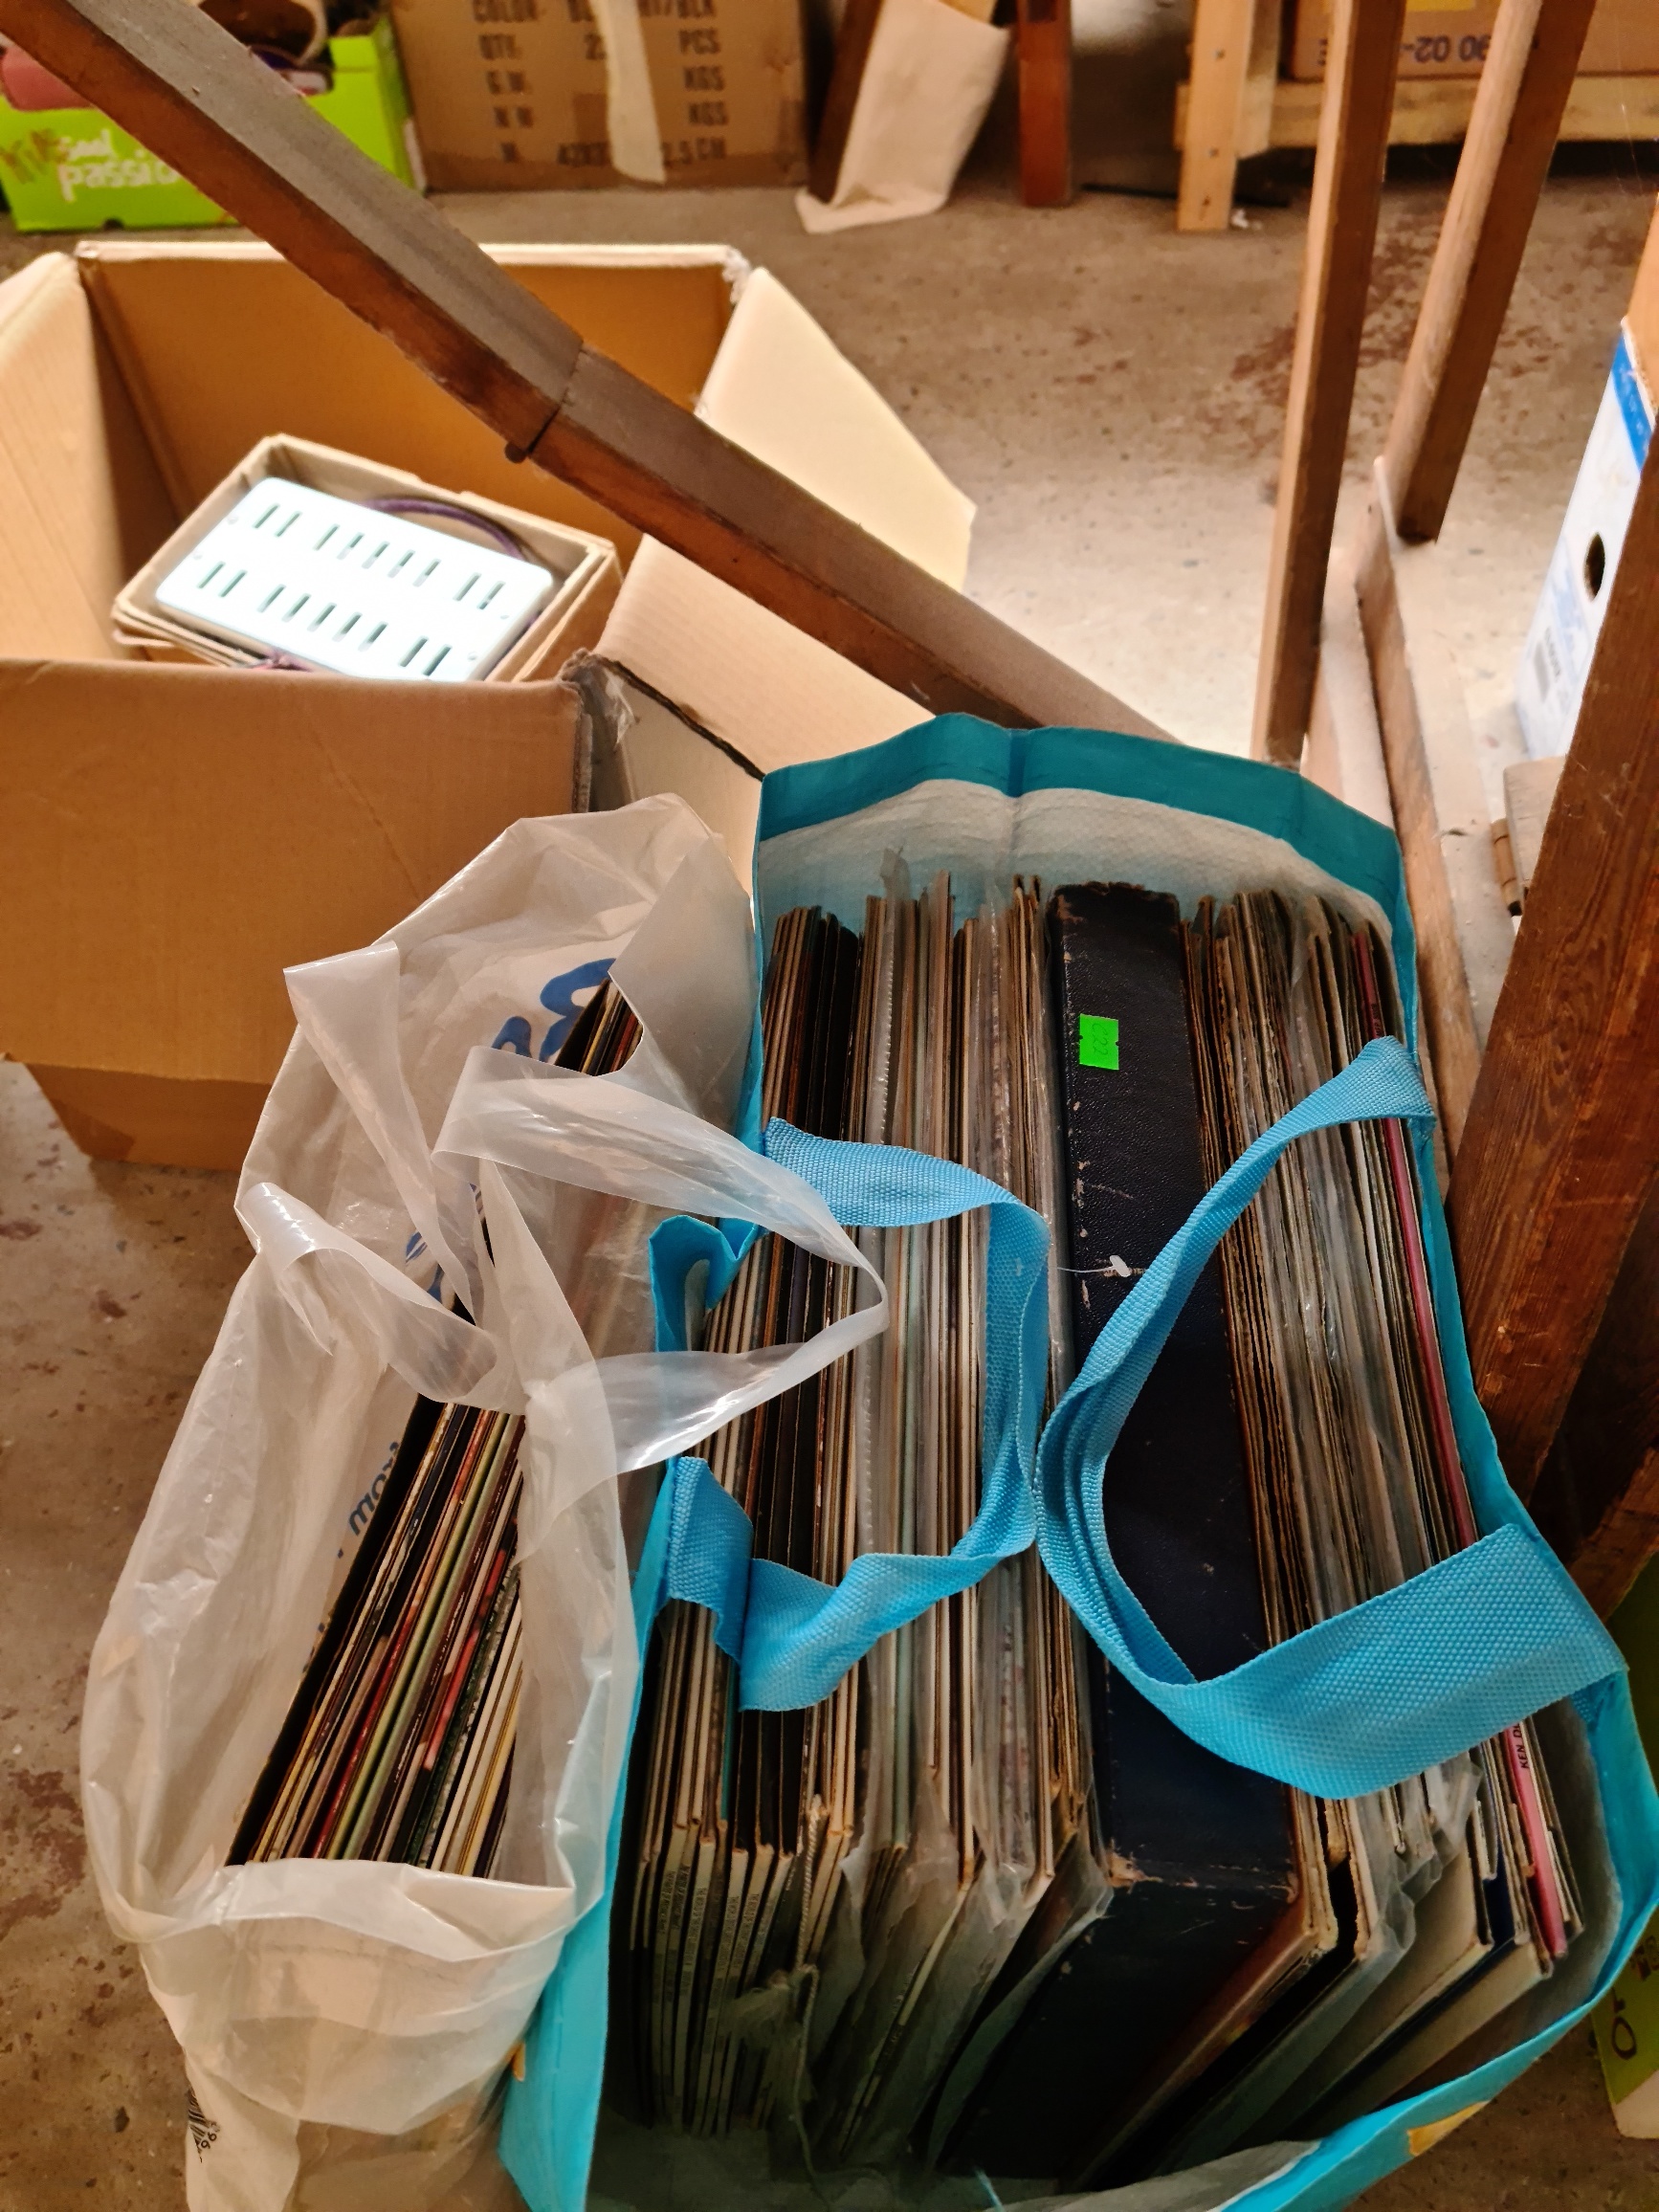 2 bags of LPs